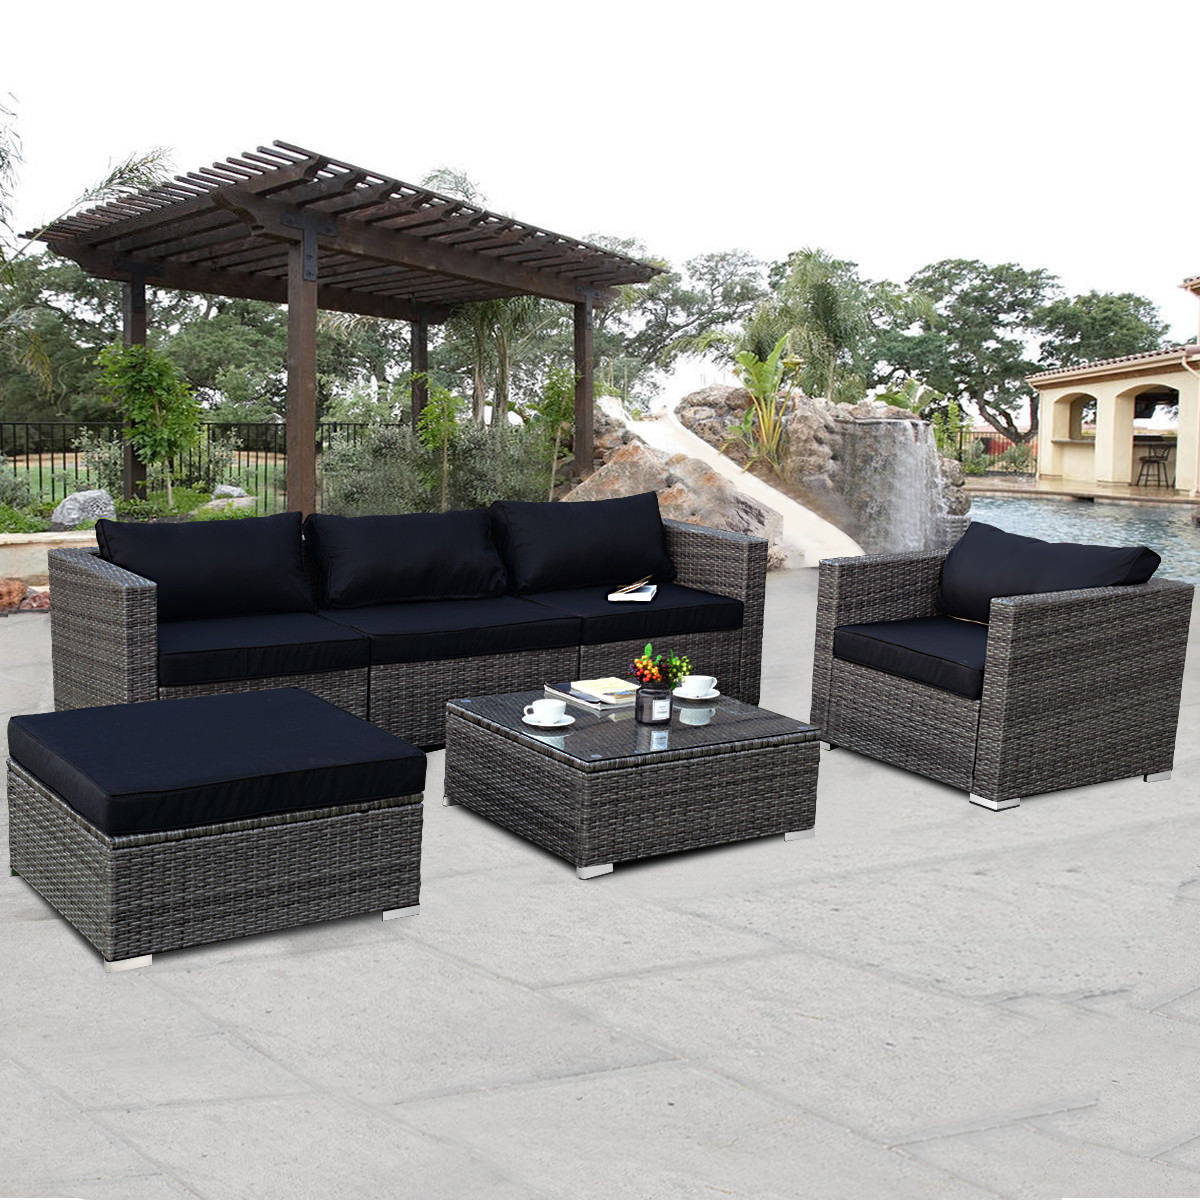 Costway 6 Piece Rattan Wicker Patio Furniture Set Sectional Sofa Couch Yard With Black Cushion Walmart with size 1200 X 1200